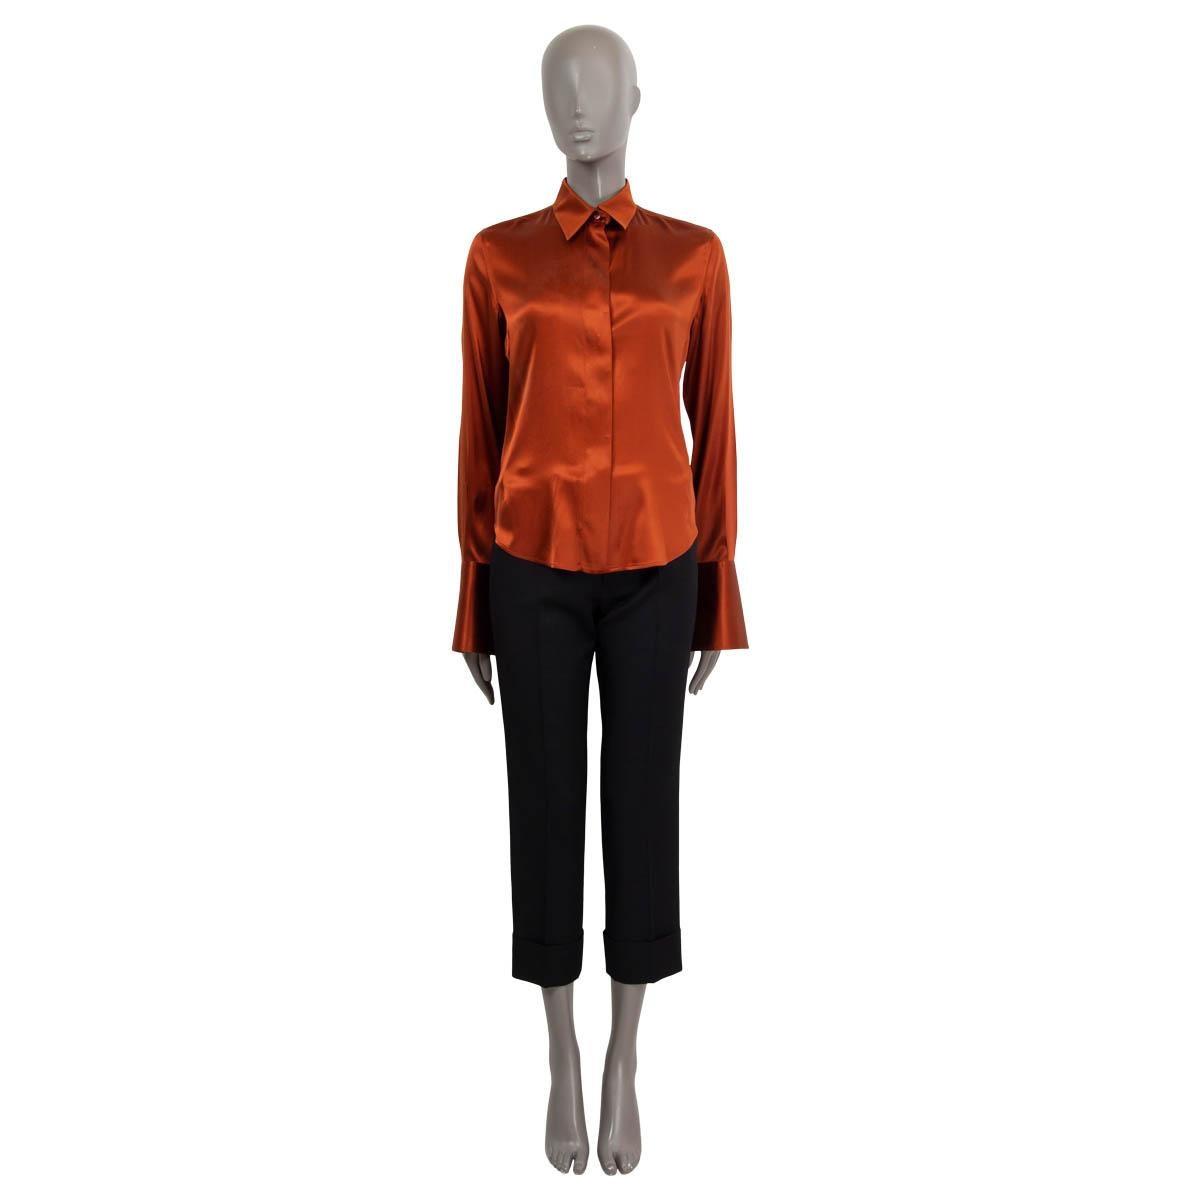 100% authentic Loro Piana long sleeve blouse in rust silk (100%) with a flat collar. Closes on the front with buttons. Unlined. Has cufflink holes - cuff links not included. Has been worn with a small scartch in the satin. Overall in excellent